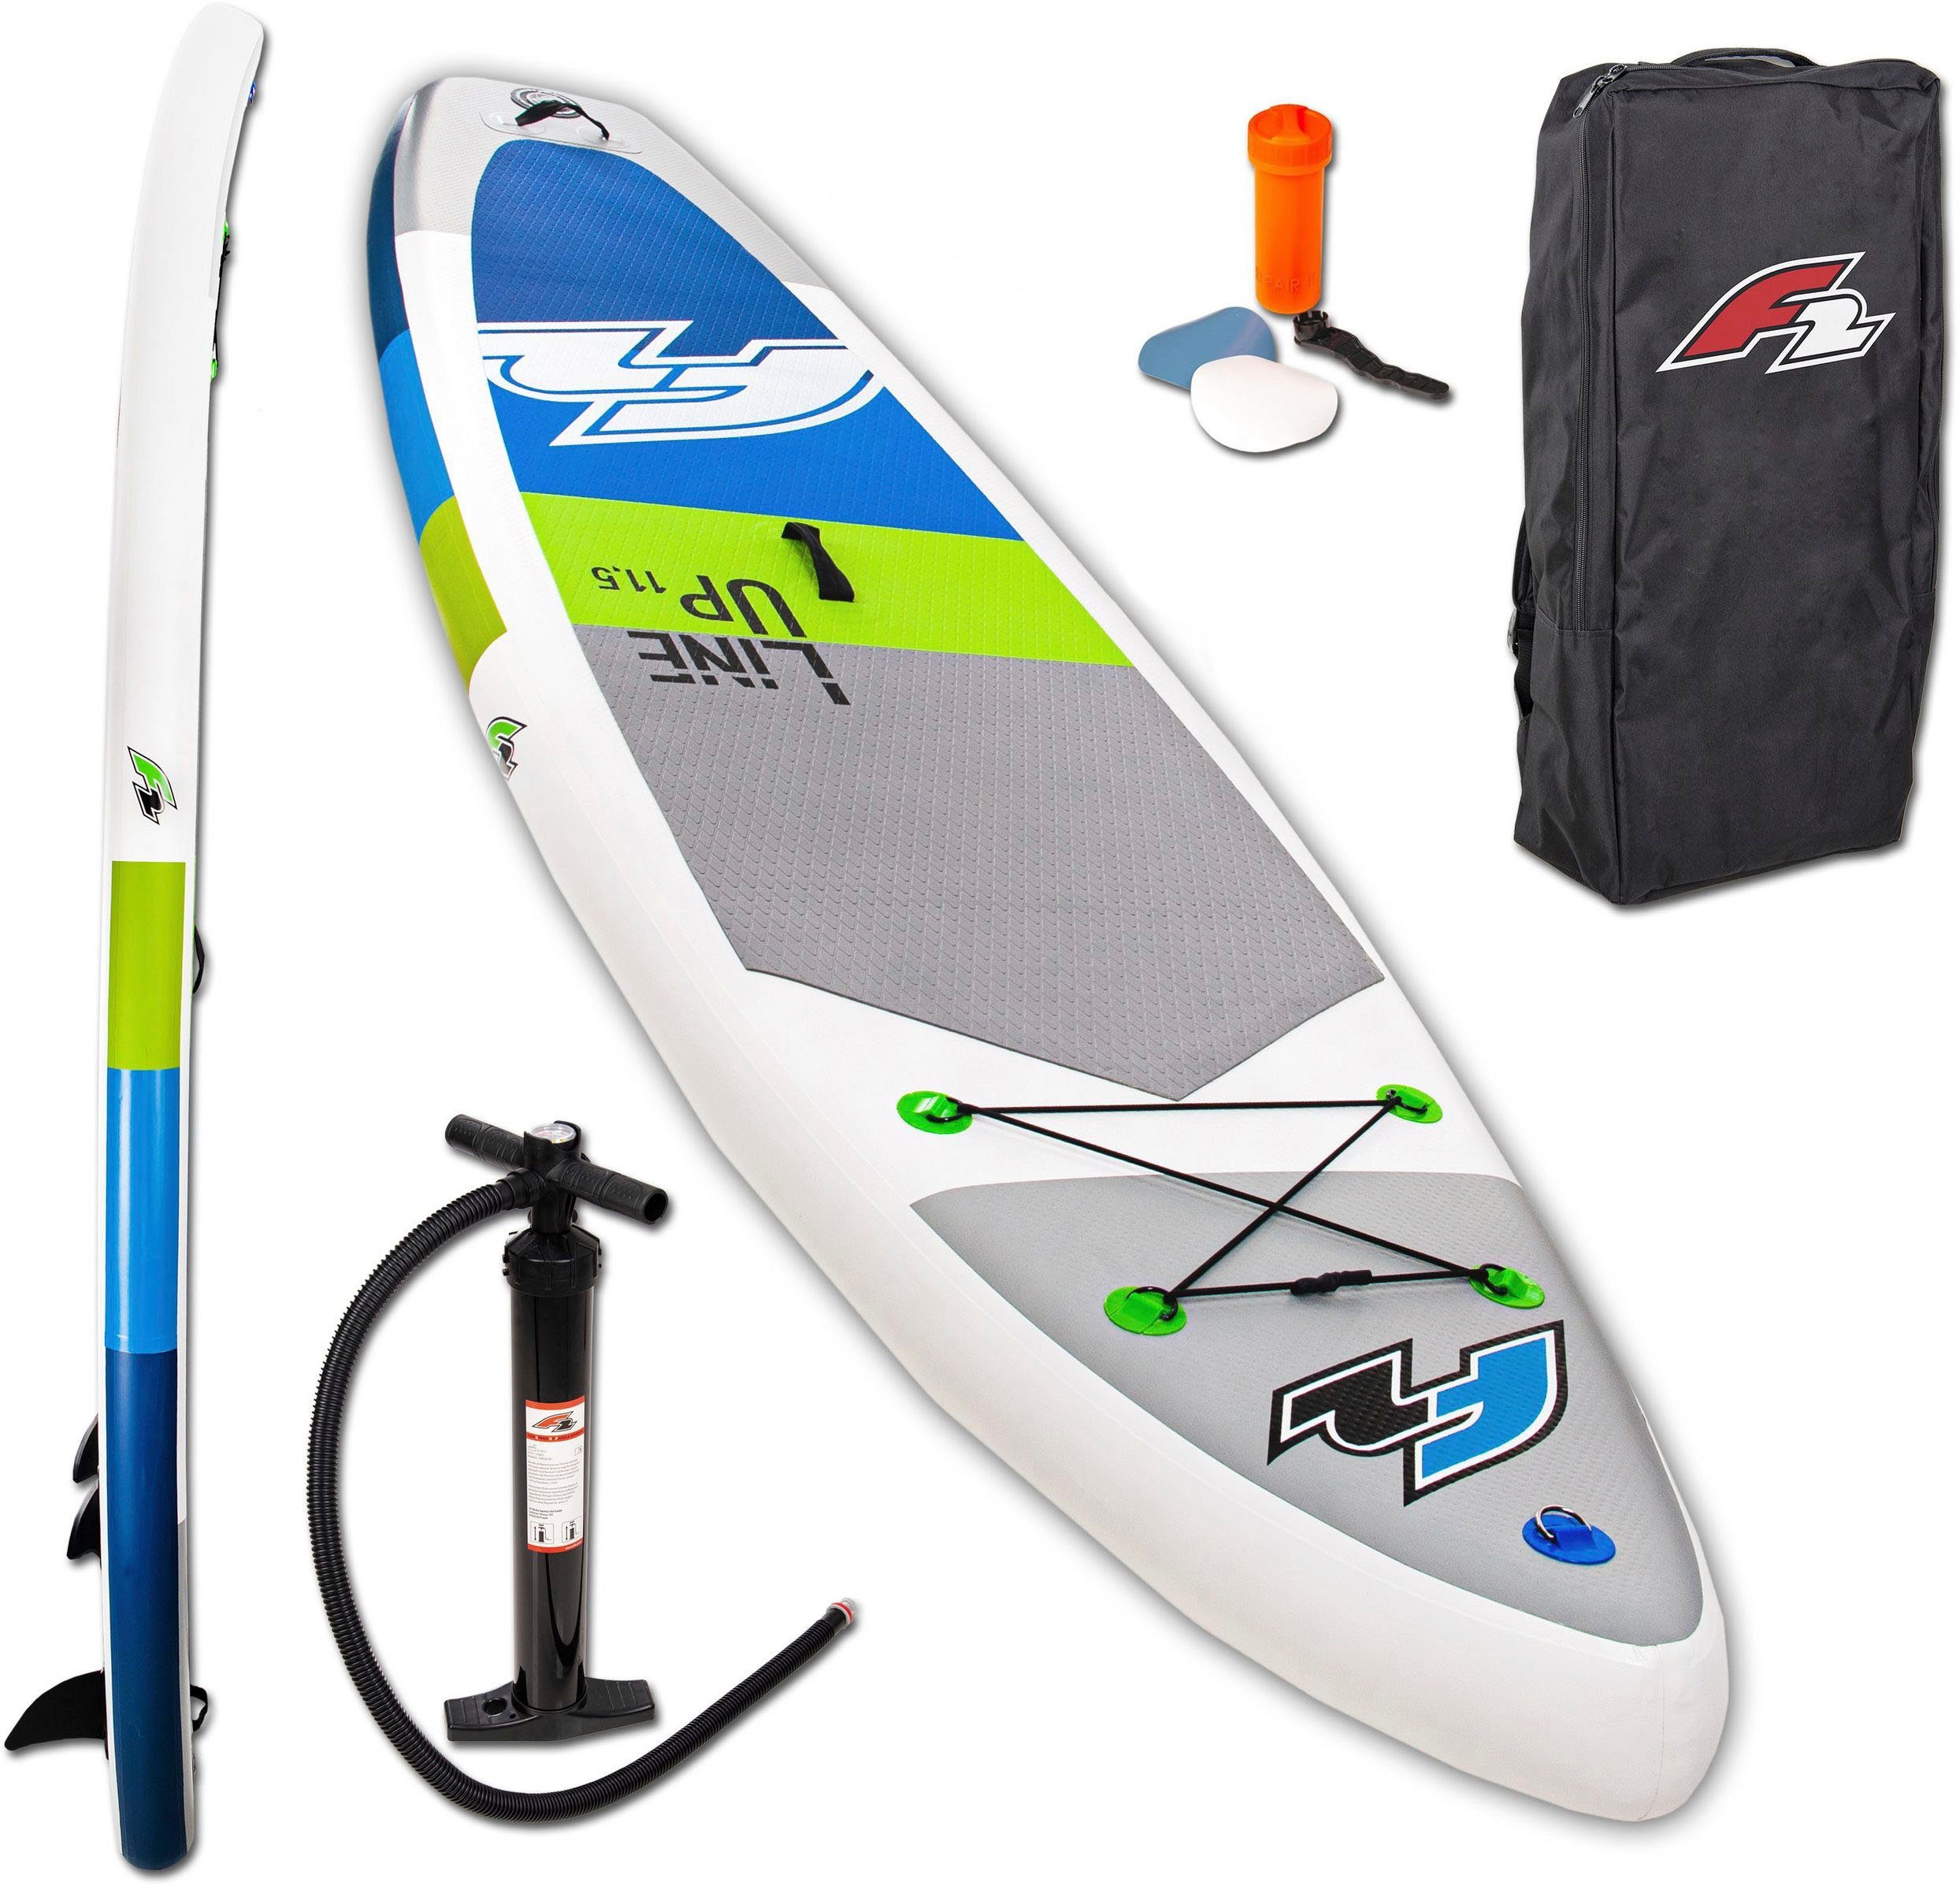 F2 Inflatable SMO Line Up (Set, F2 3 SUP-Board tlg) blue